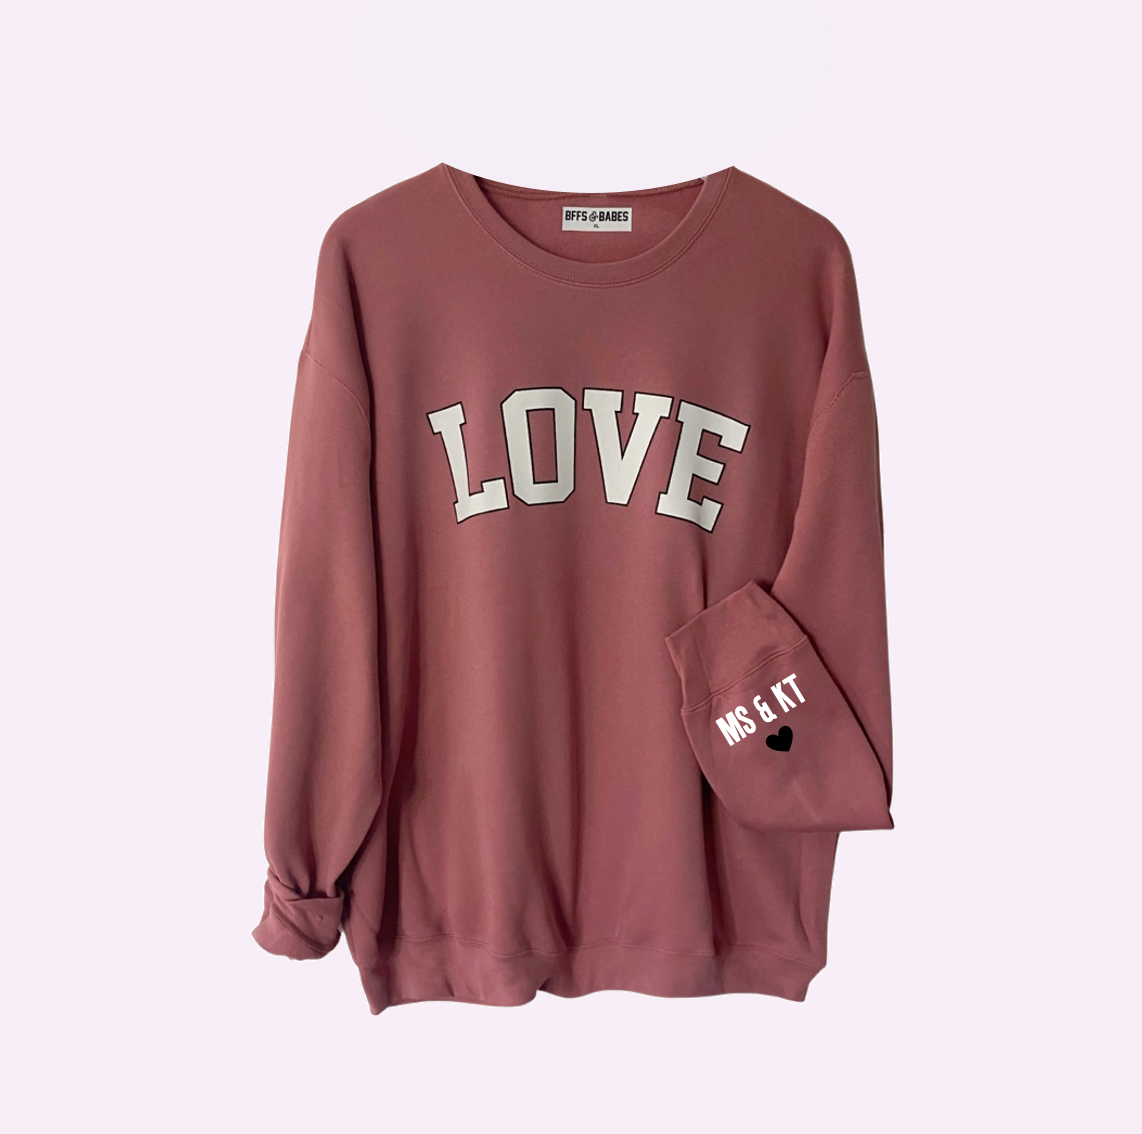 LOVE ON THE CUFF ♡ antique love sweatshirt with personalized cuff